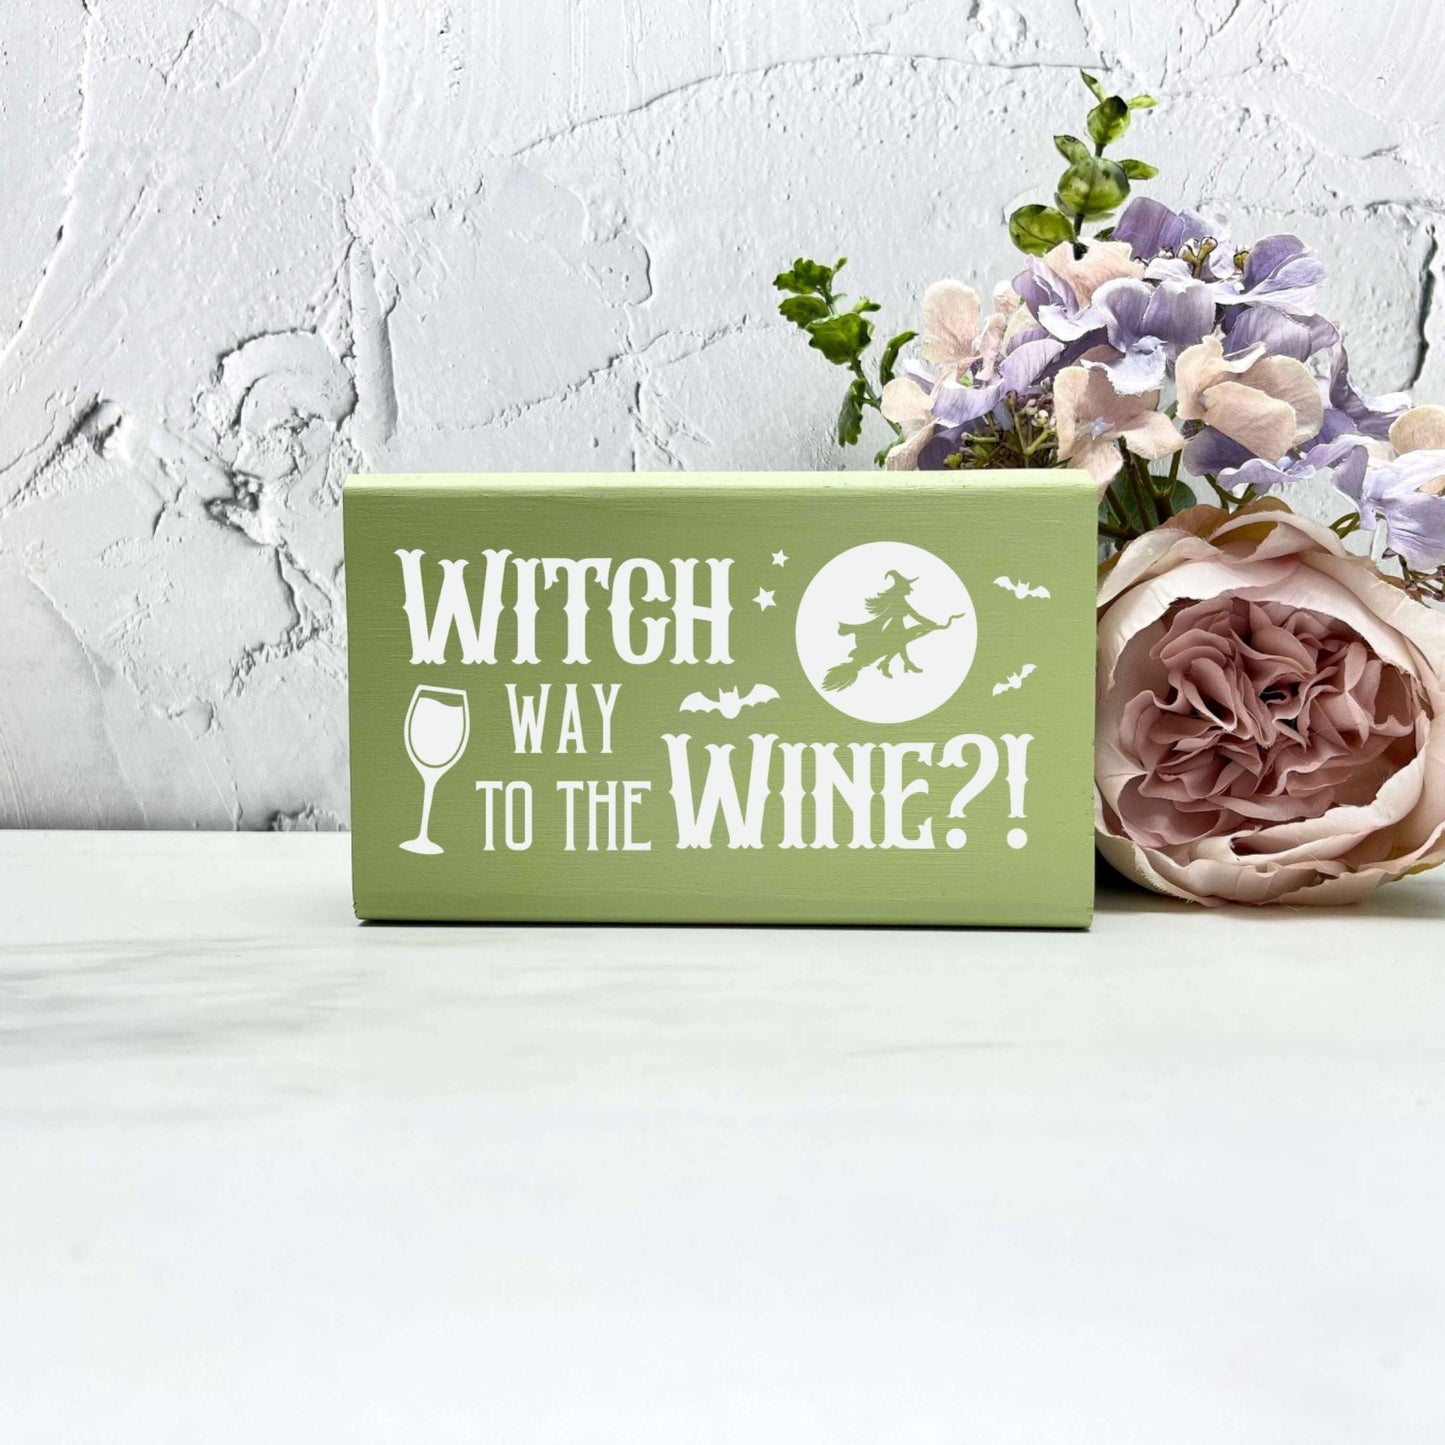 Witch way to the wine Sign, Halloween Wood Sign, Halloween Home Decor, Spooky Decor